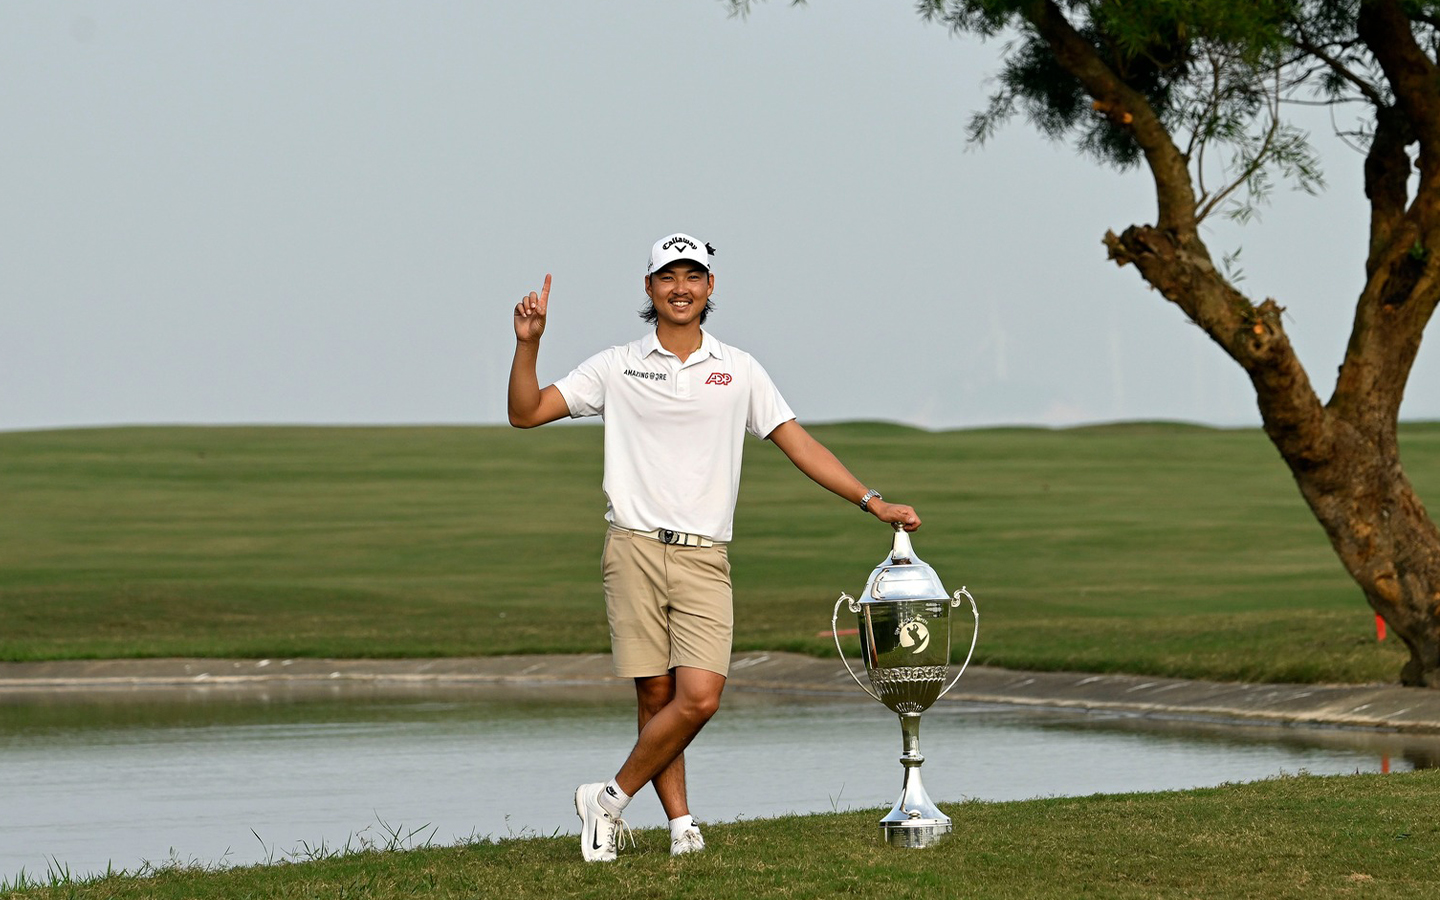 Australian golfer Min Woo Lee bags a record-breaking victory at the Macao Open